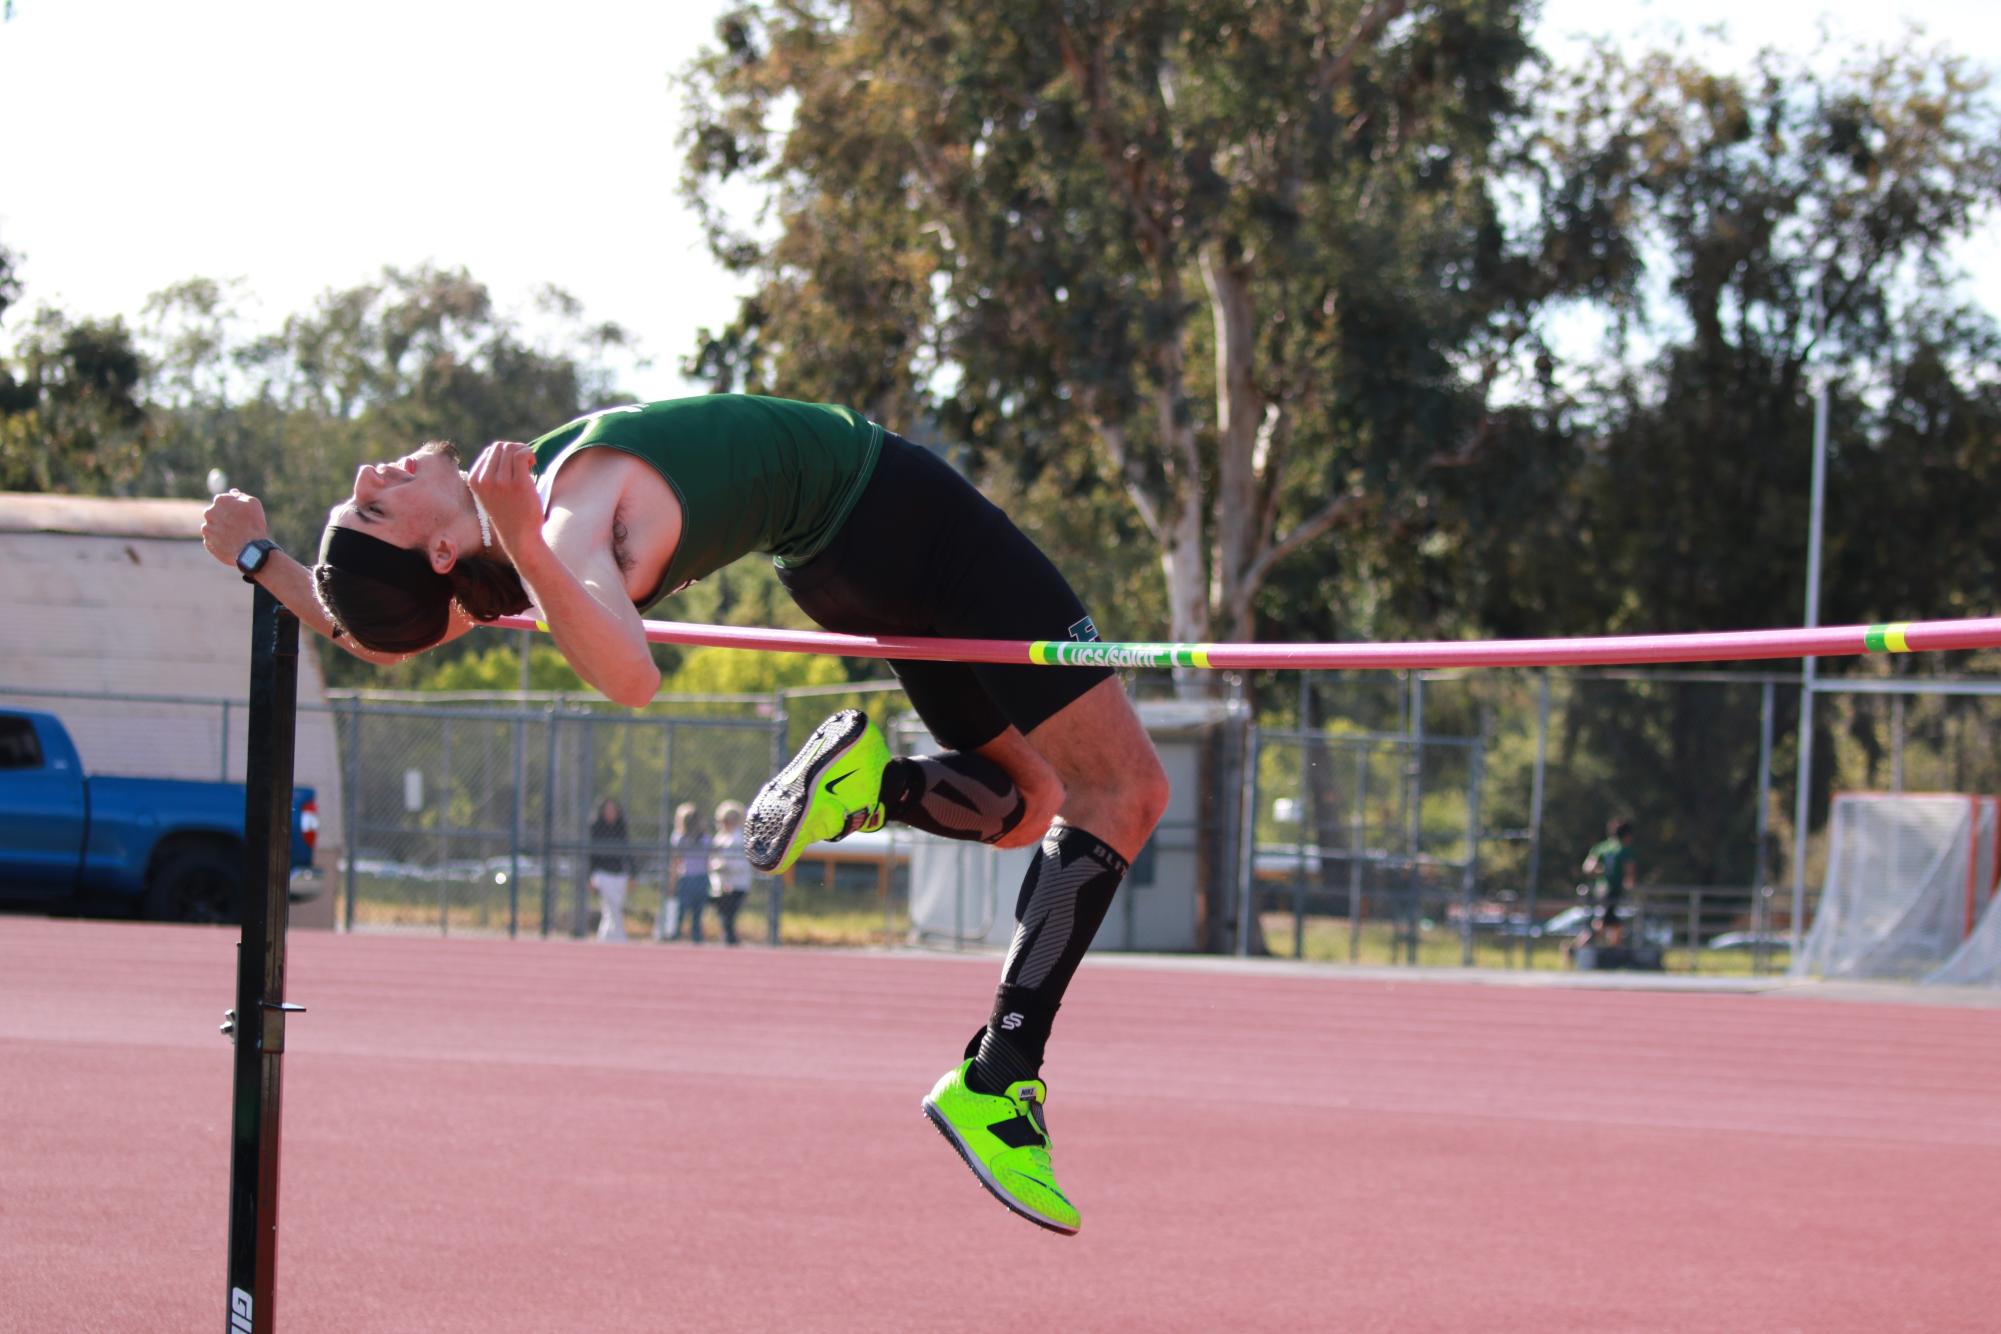 Track stars jump their way to new personal bests